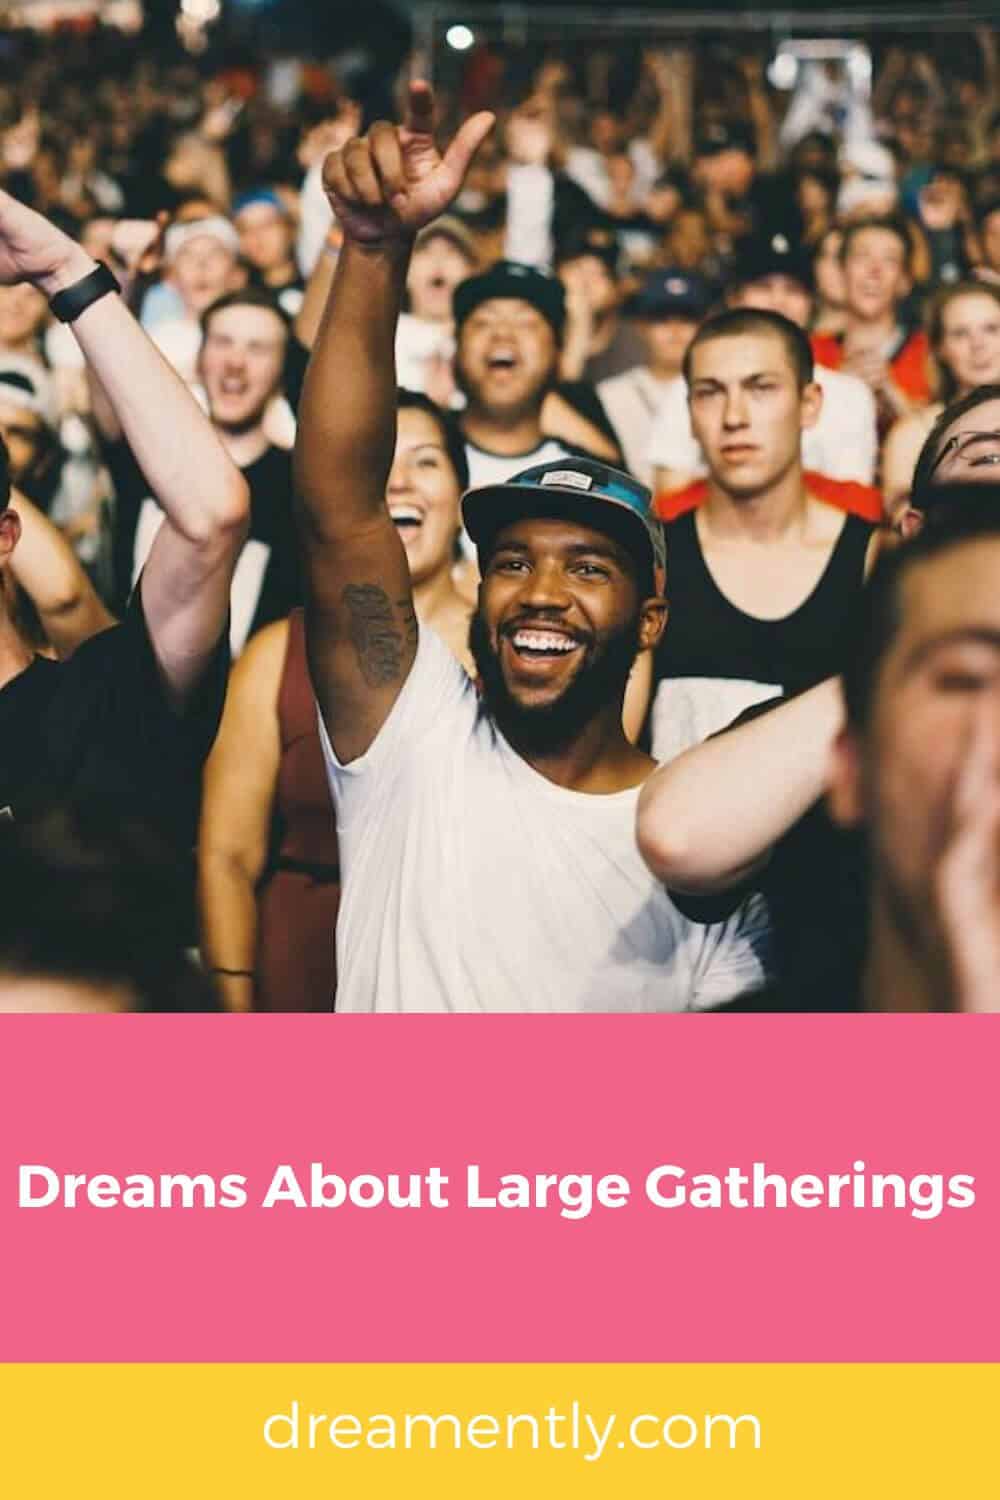 Dreams About Large Gatherings (2)